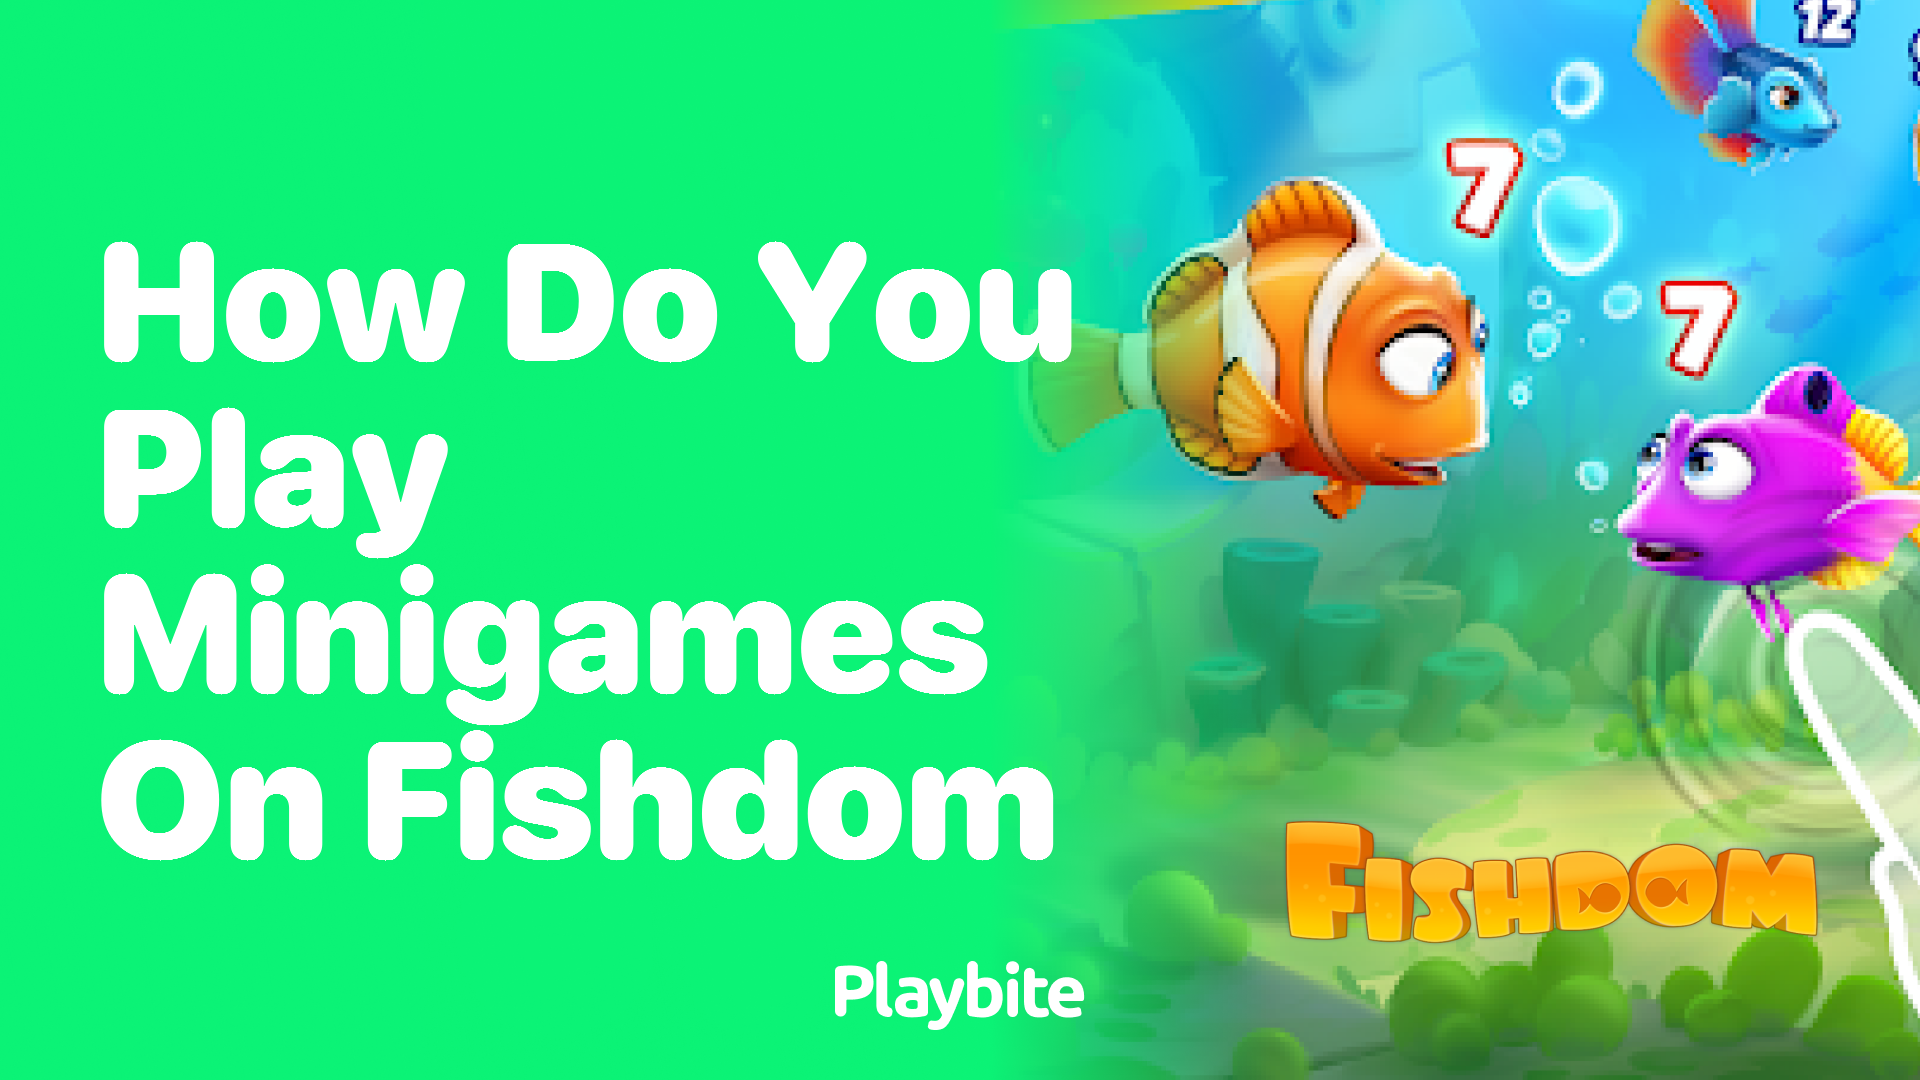 How Do You Play Minigames on Fishdom?